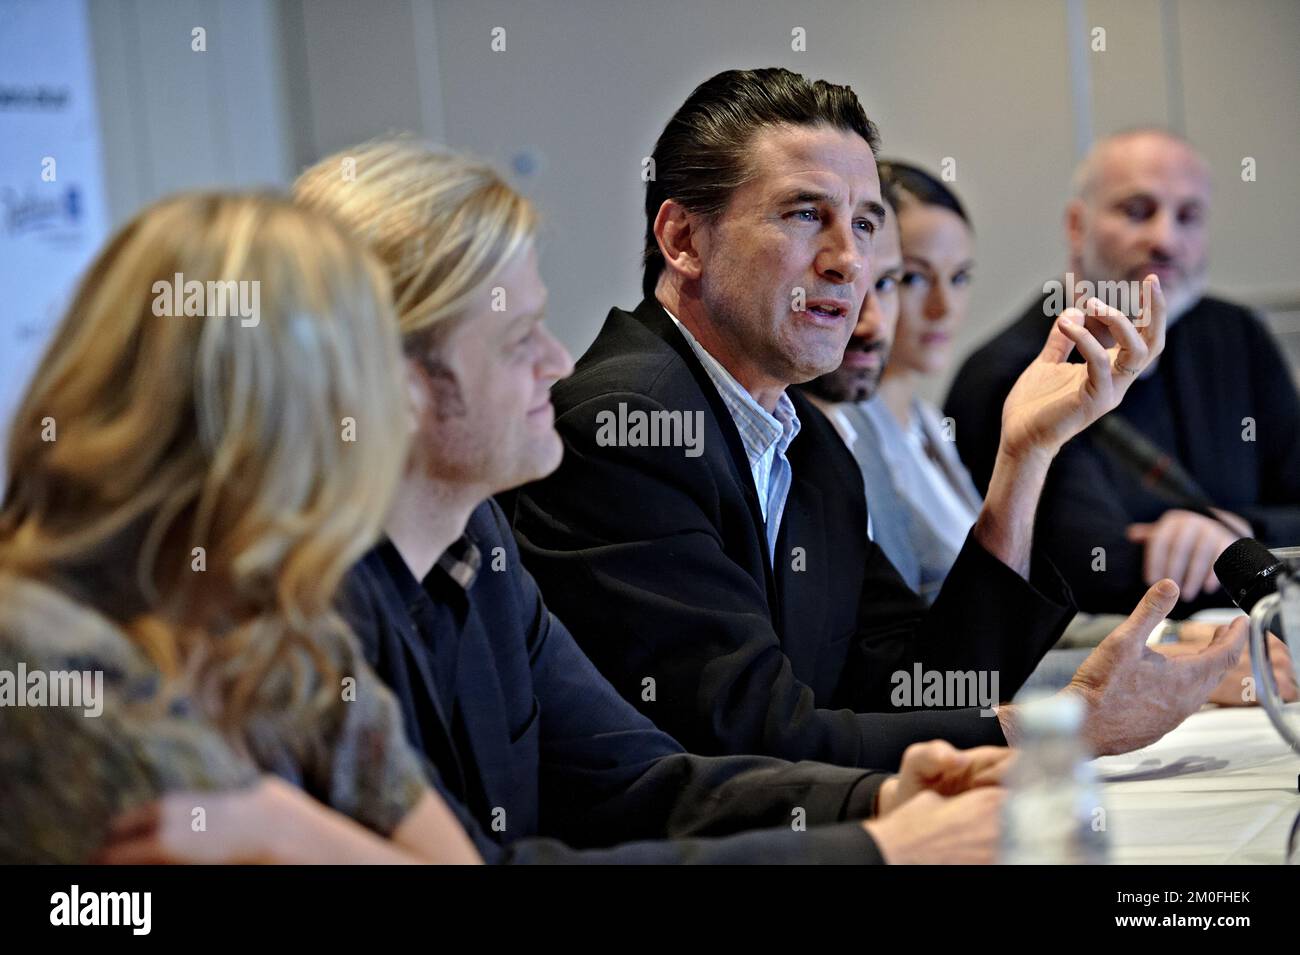 American actor William Baldwin performs in the new Danish thriller 'The Stranger Inside.' The rest of the team consists of Estella Warren, Sarah Butler and Kim bodnia from Denmark. The movie is being shoot in Mallorca and Denmark and is directed and produced by Adam Neutzsky-Wulff and Michael Aoun. The team held a press-meeting in Copenhagen Monday January 9th. PHOTOGRAPHER TARIQ MIKKEL KHAN / POLFOTO Stock Photo